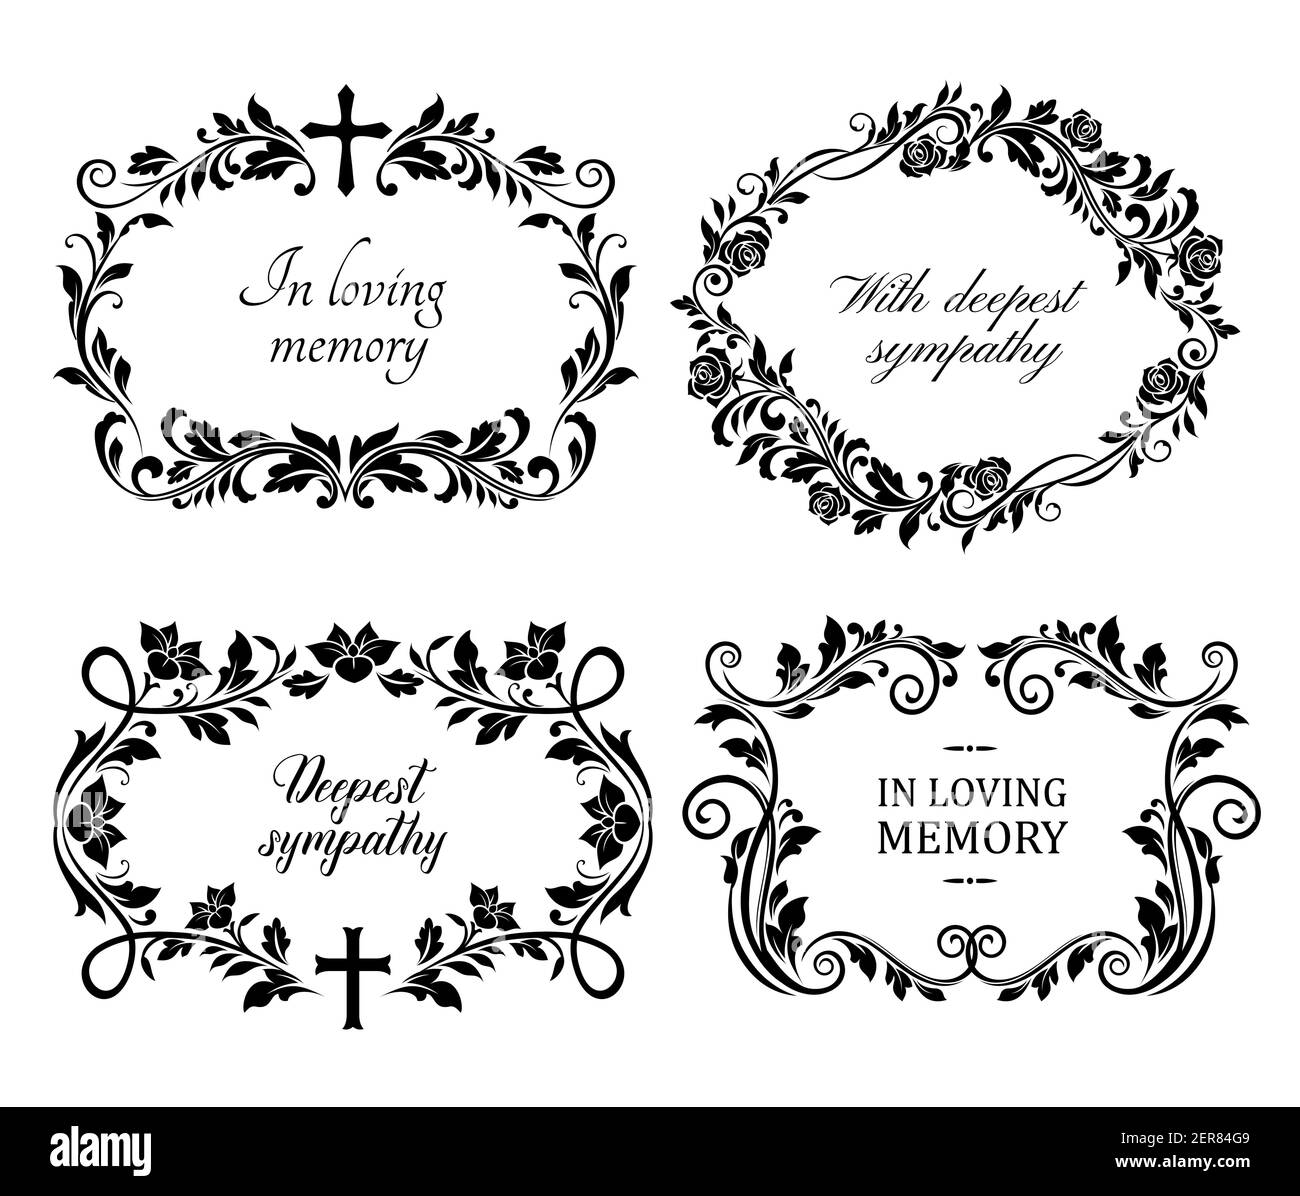 Funeral mourning frames with roses and lily flowers engraved arrangements. Funerary memorial plates borders with floral black ornaments and cross vect Stock Vector